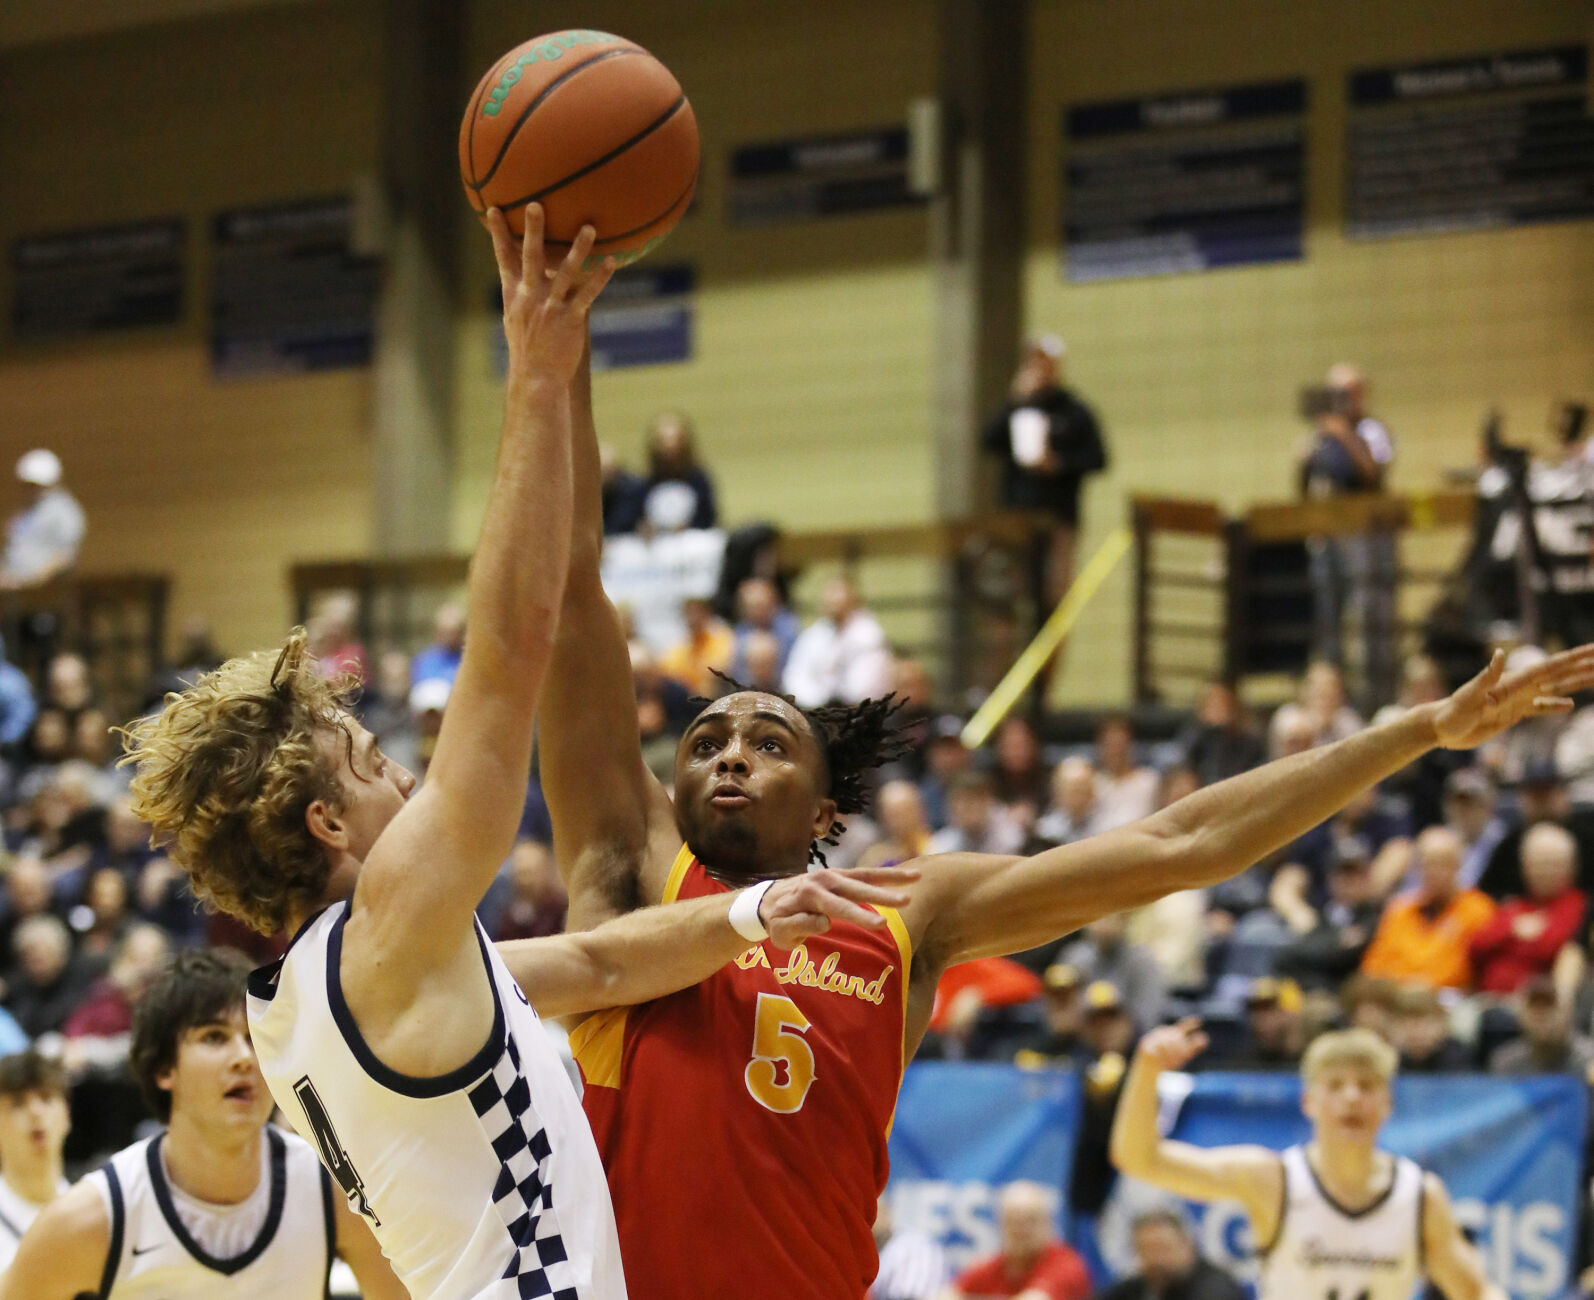 Rock Island Pulls Off Triple Overtime Victory Over Pleasant Valley, Kipper’s Missed Free Throws Cost Game